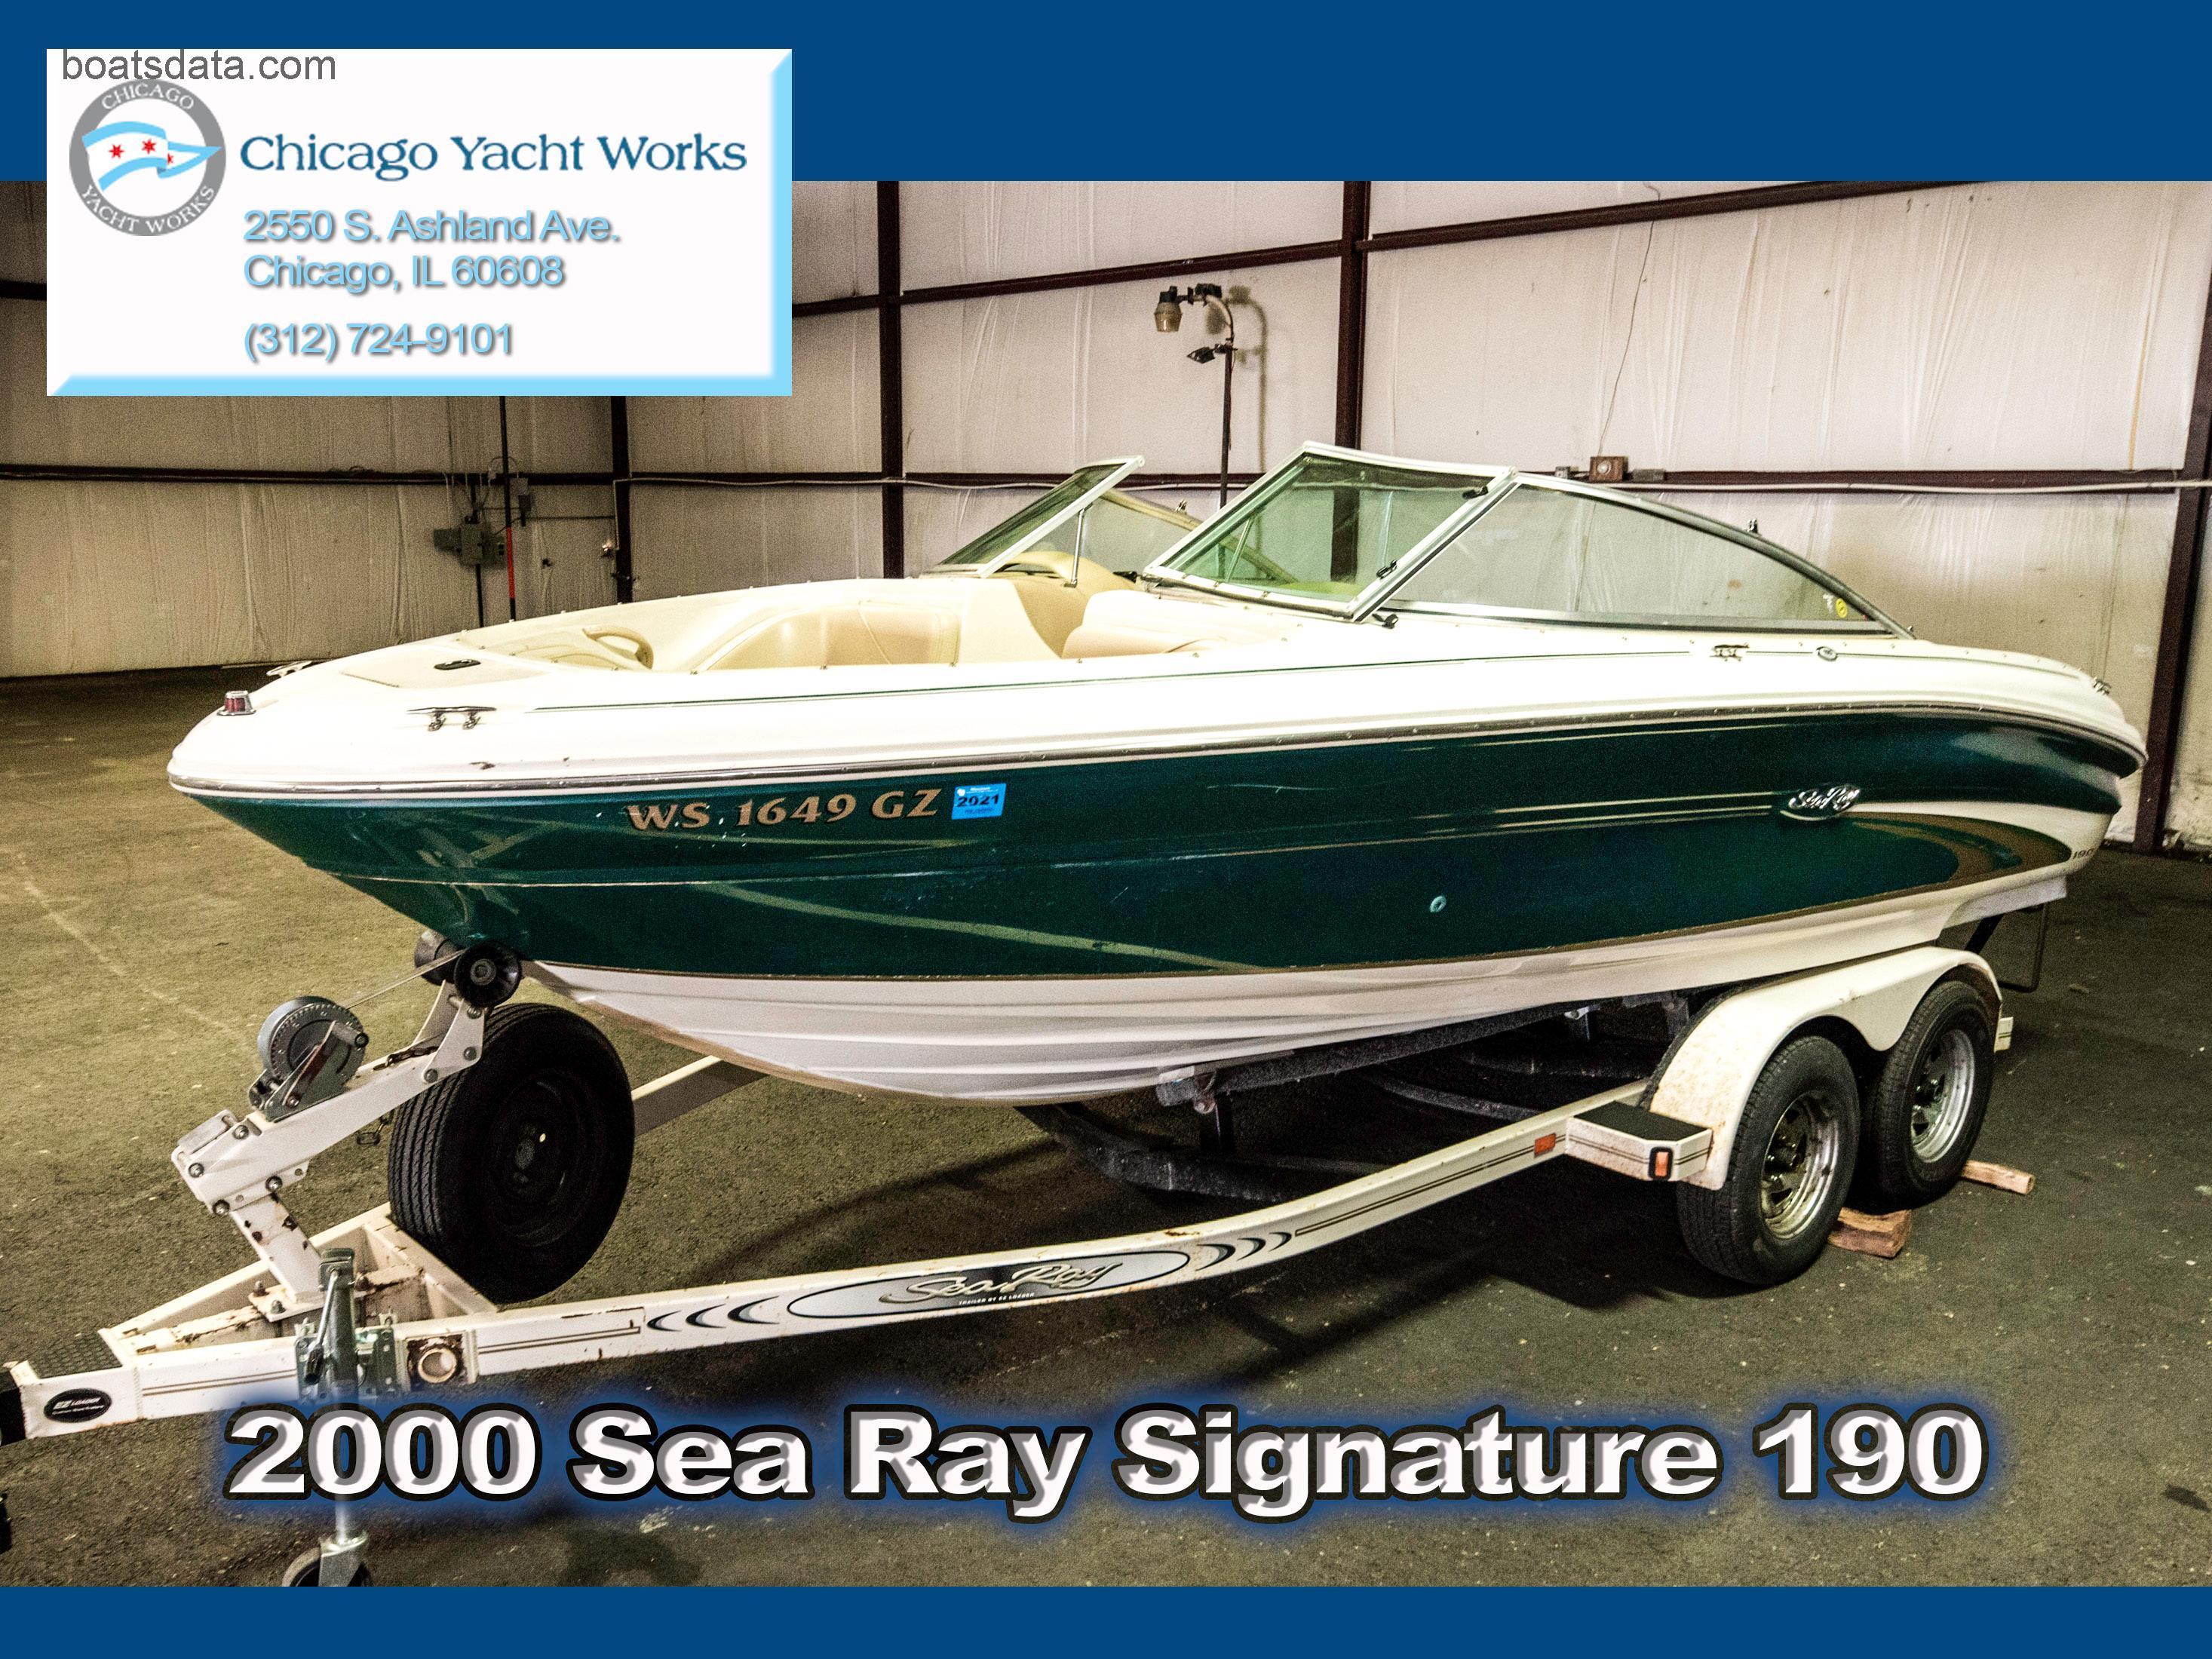 Sea Ray 190 Bow Rider tv detailed specifications and features